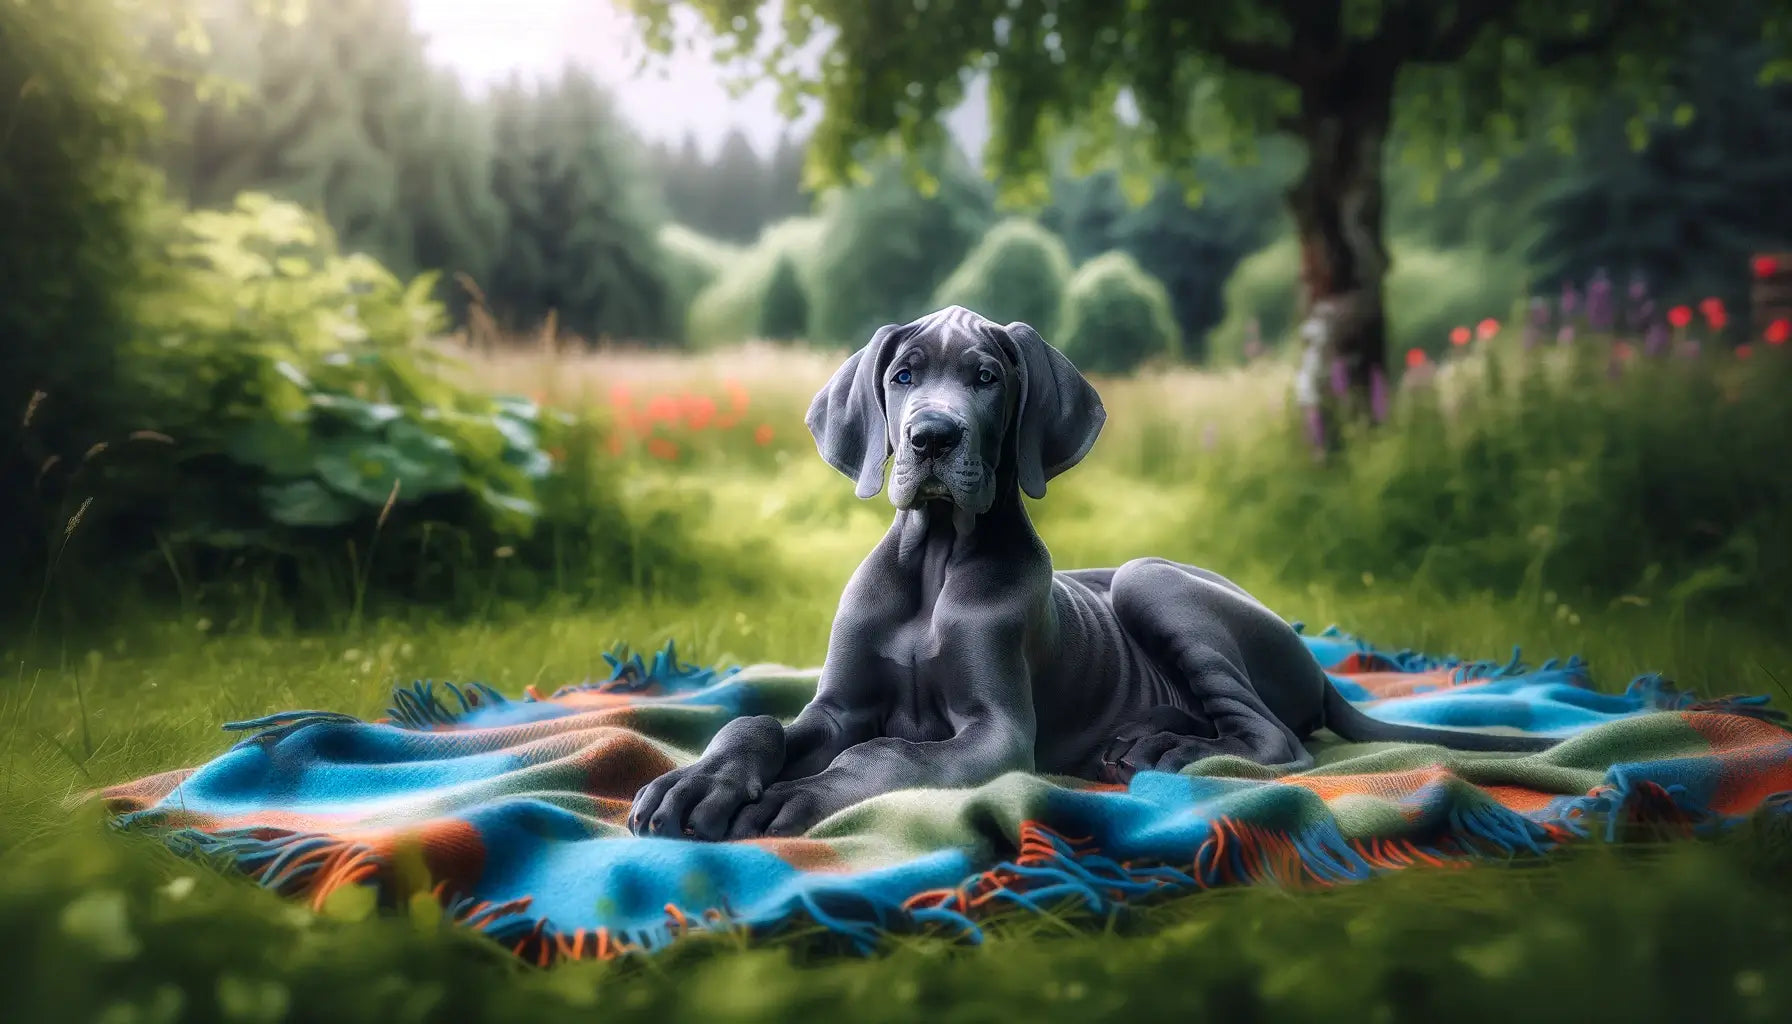 Blue Great Dane on a blanket outdoors, set against a backdrop of greenery, showcasing its noble breed characteristics despite its young age.